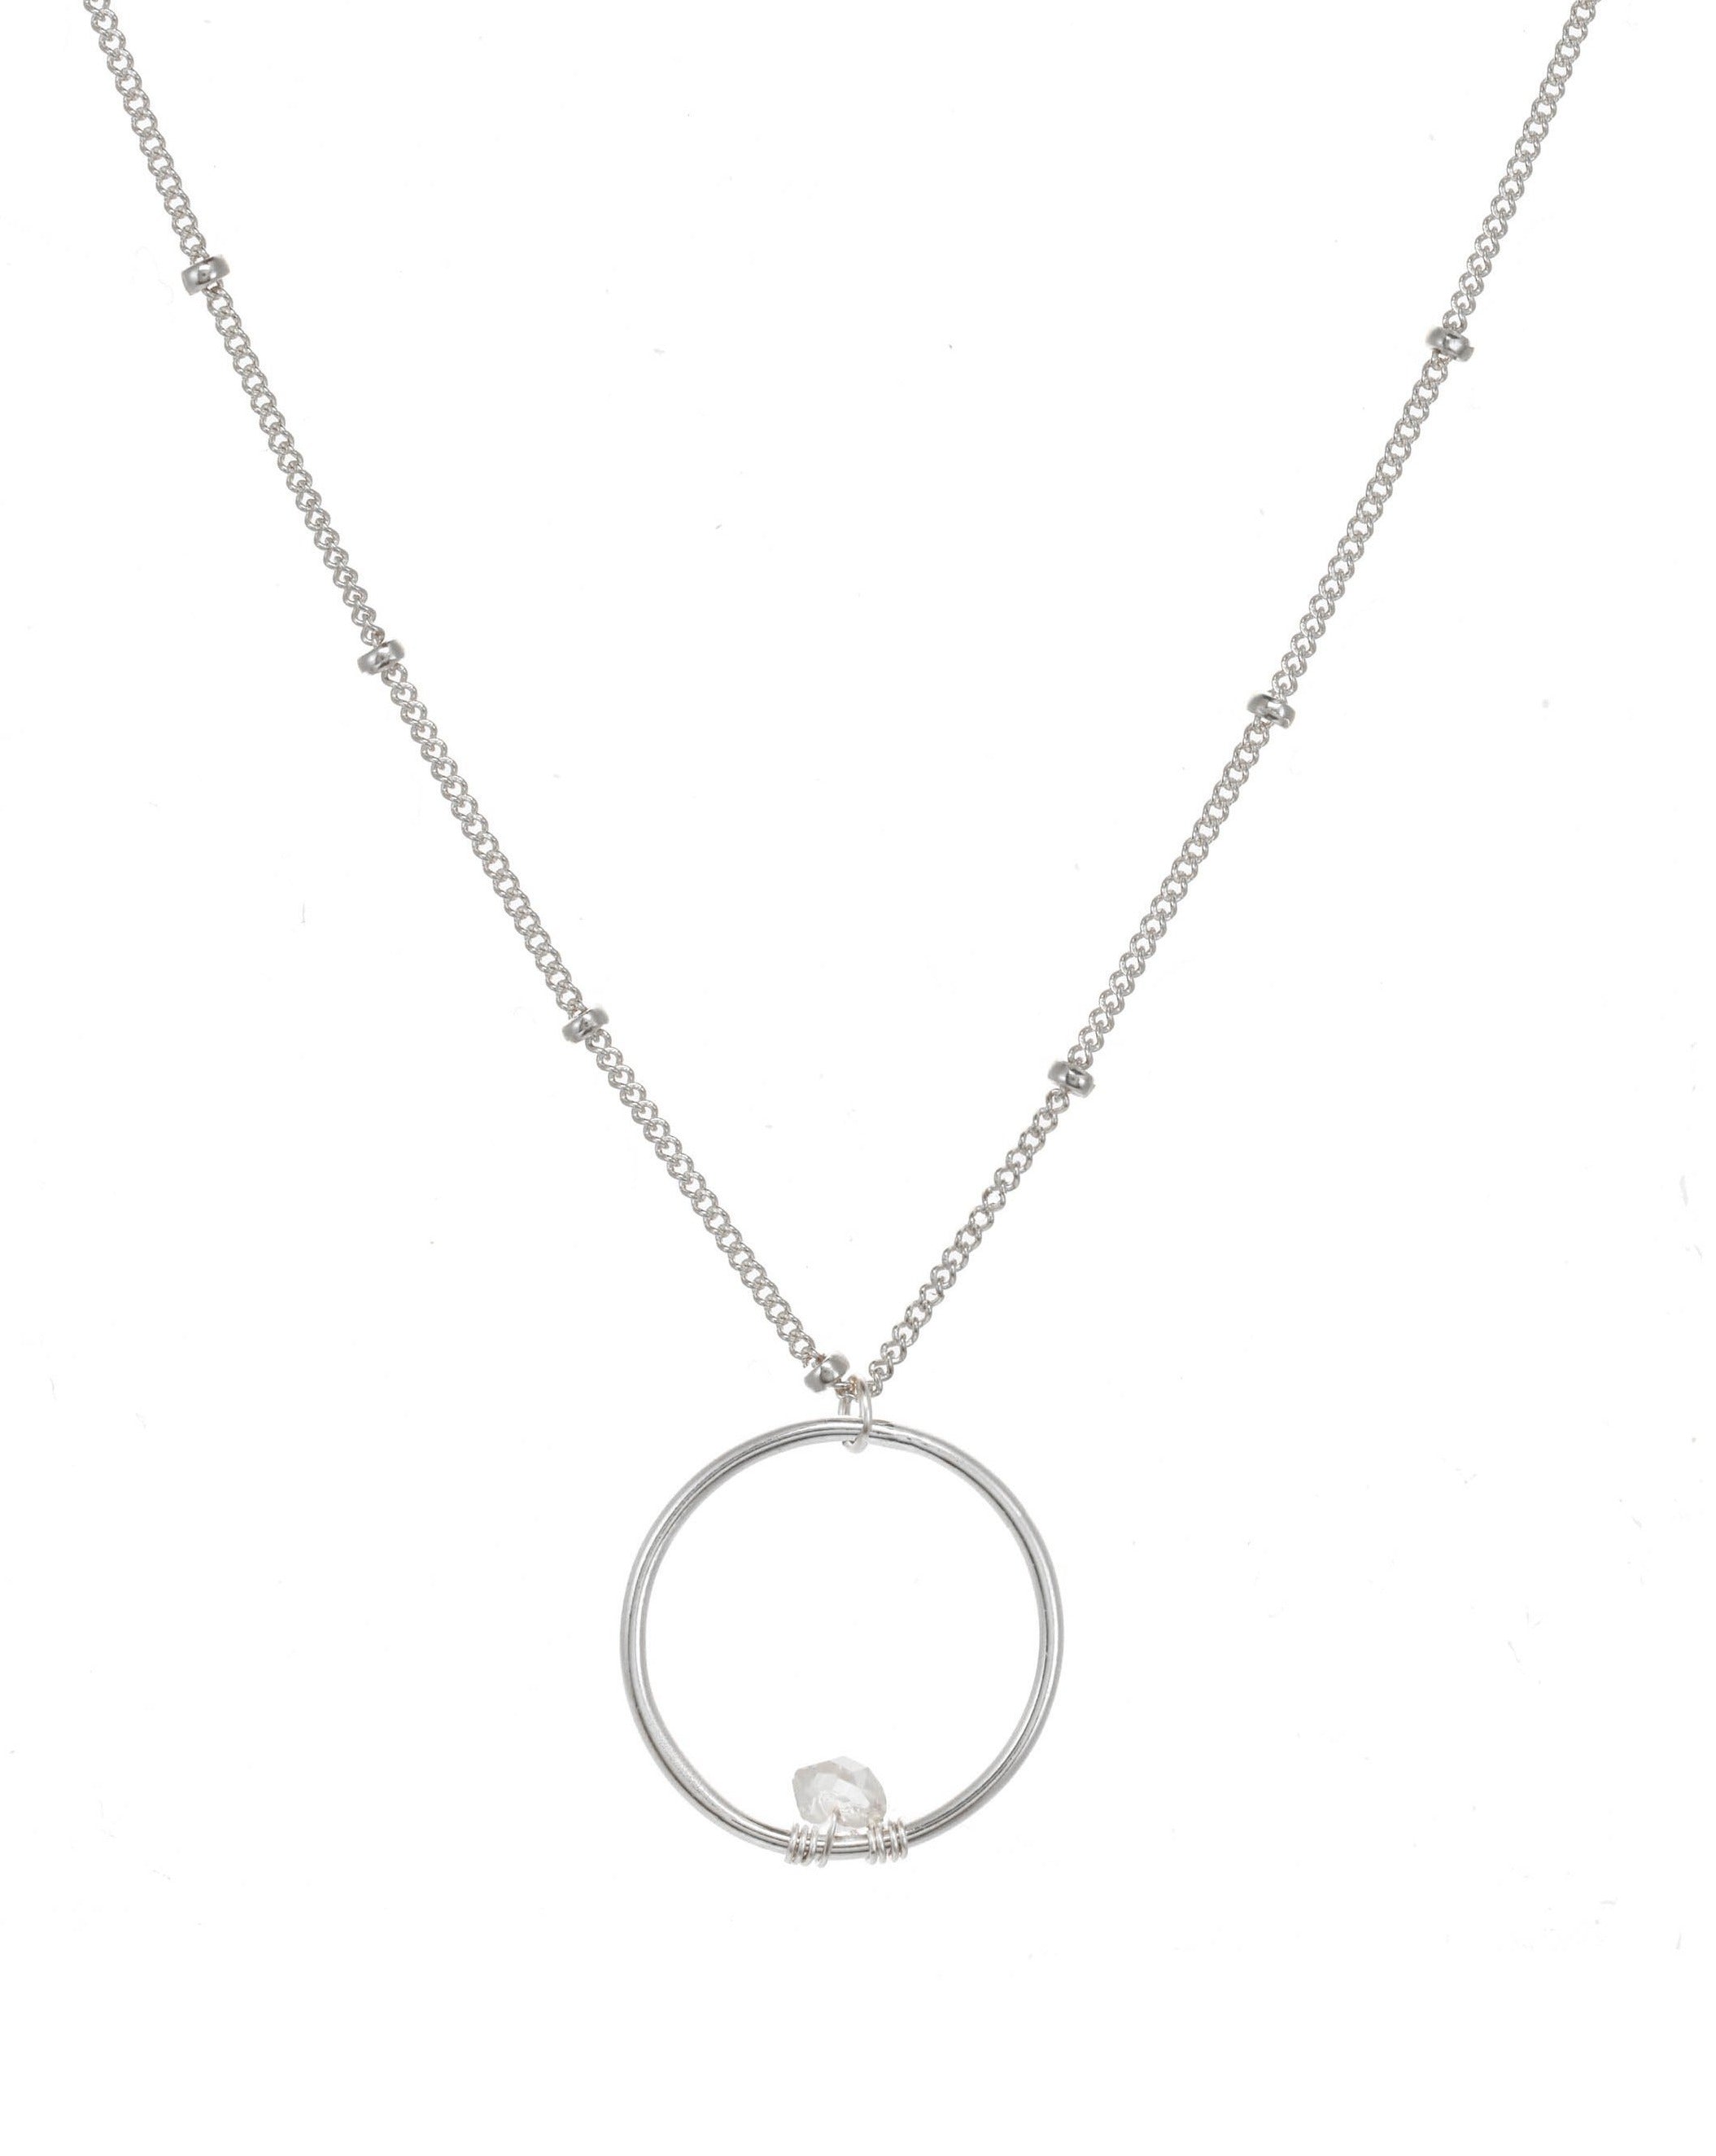 Balan Necklace by KOZAKH. A 16 to 18 inch adjustable length necklace in Sterling Silver, featuring a ring with a 3-4mm Herkimer Diamond.